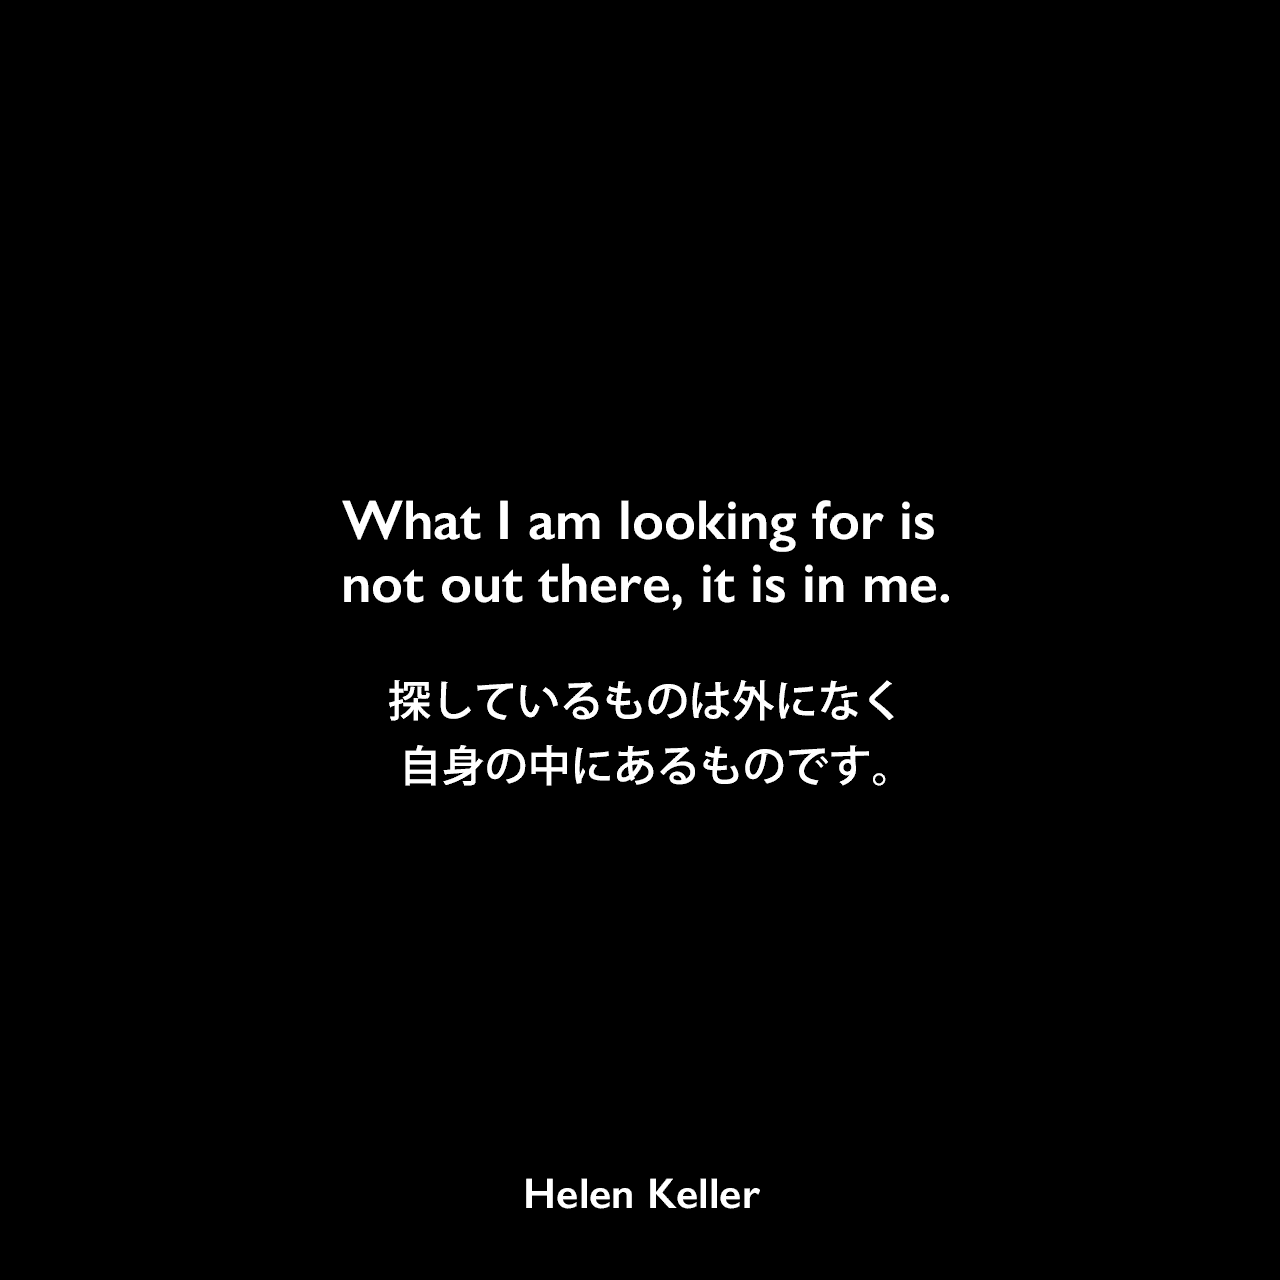 What I am looking for is not out there, it is in me.探しているものは外になく、自身の中にあるものです。Helen Keller